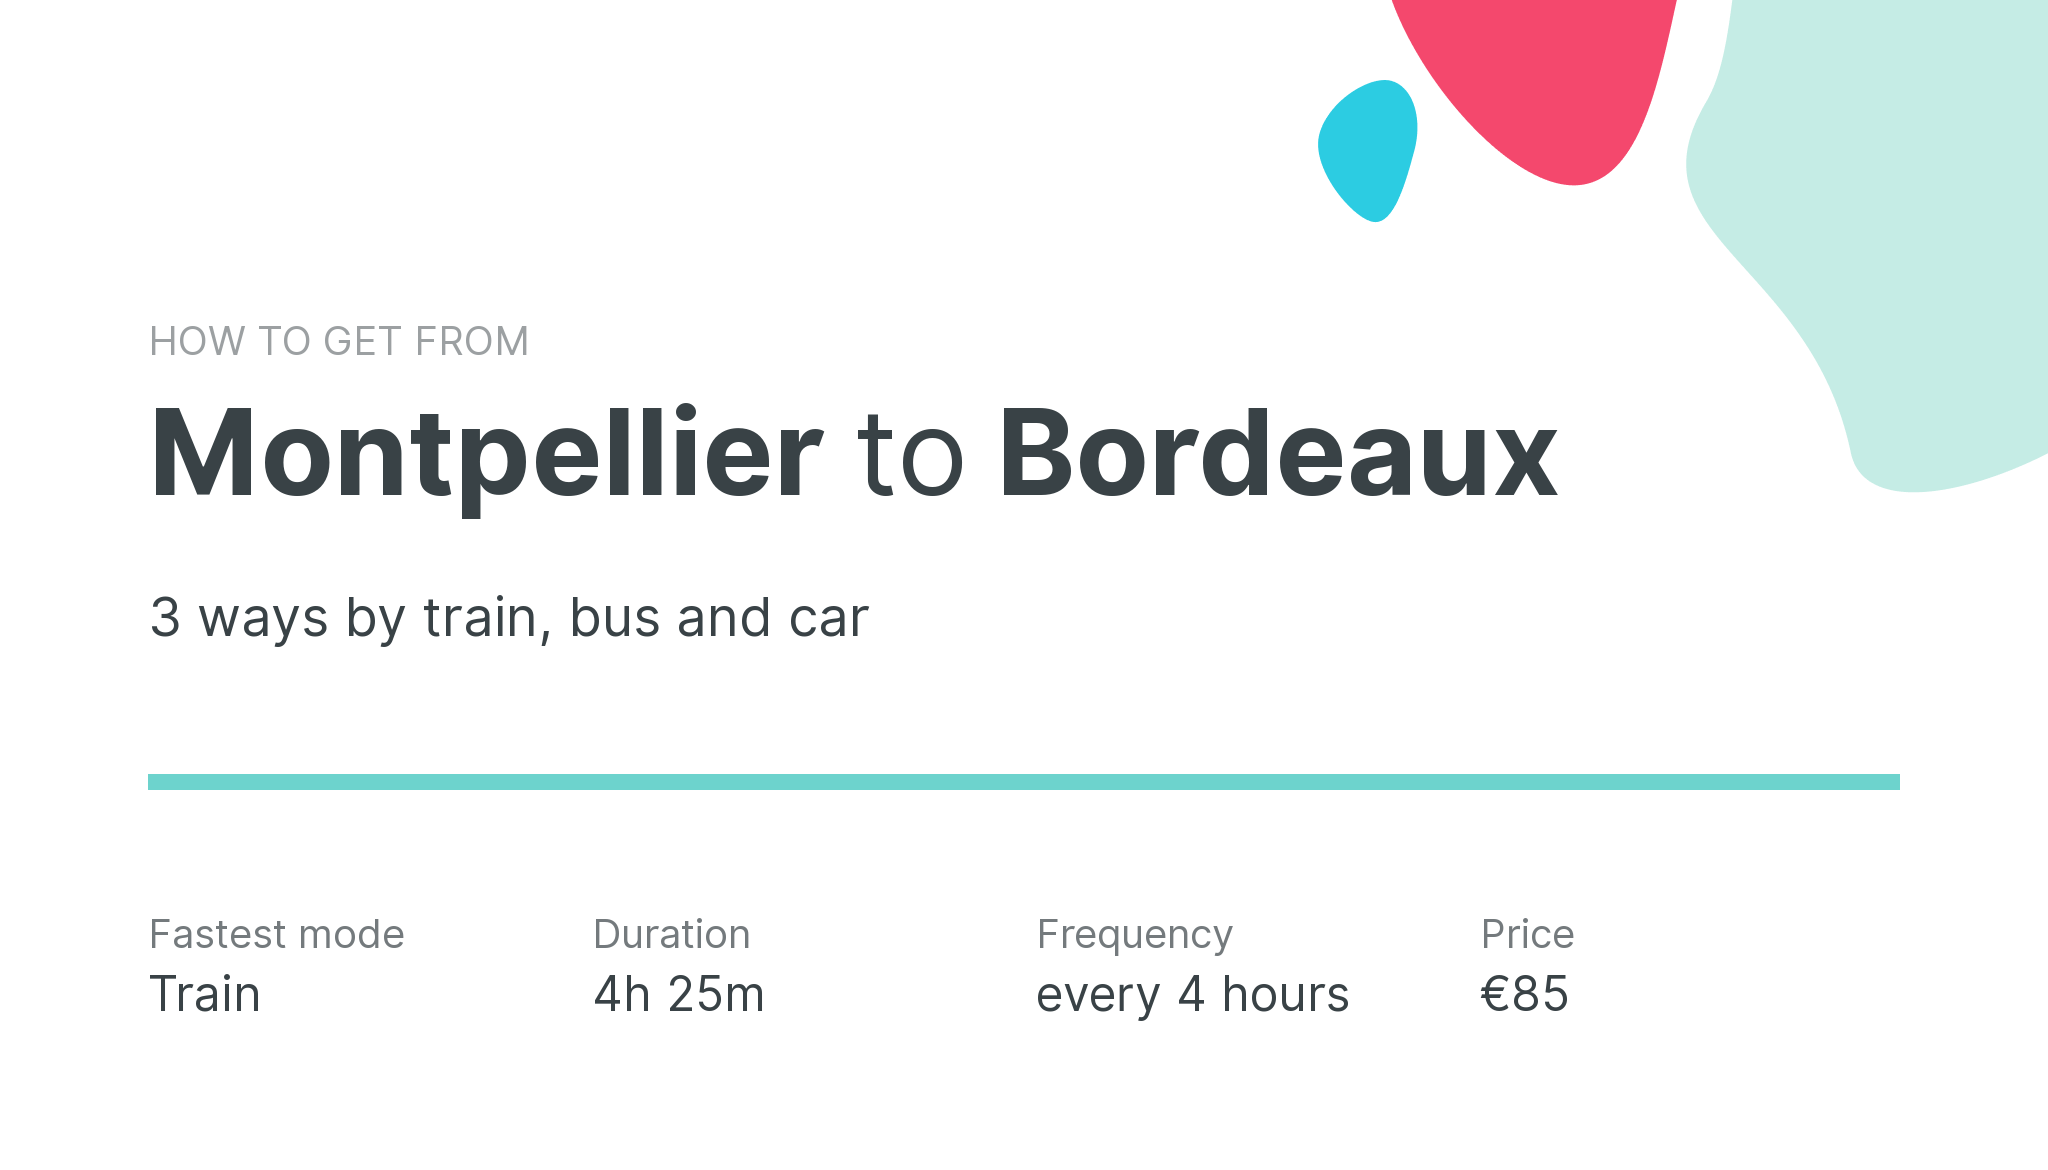 How do I get from Montpellier to Bordeaux